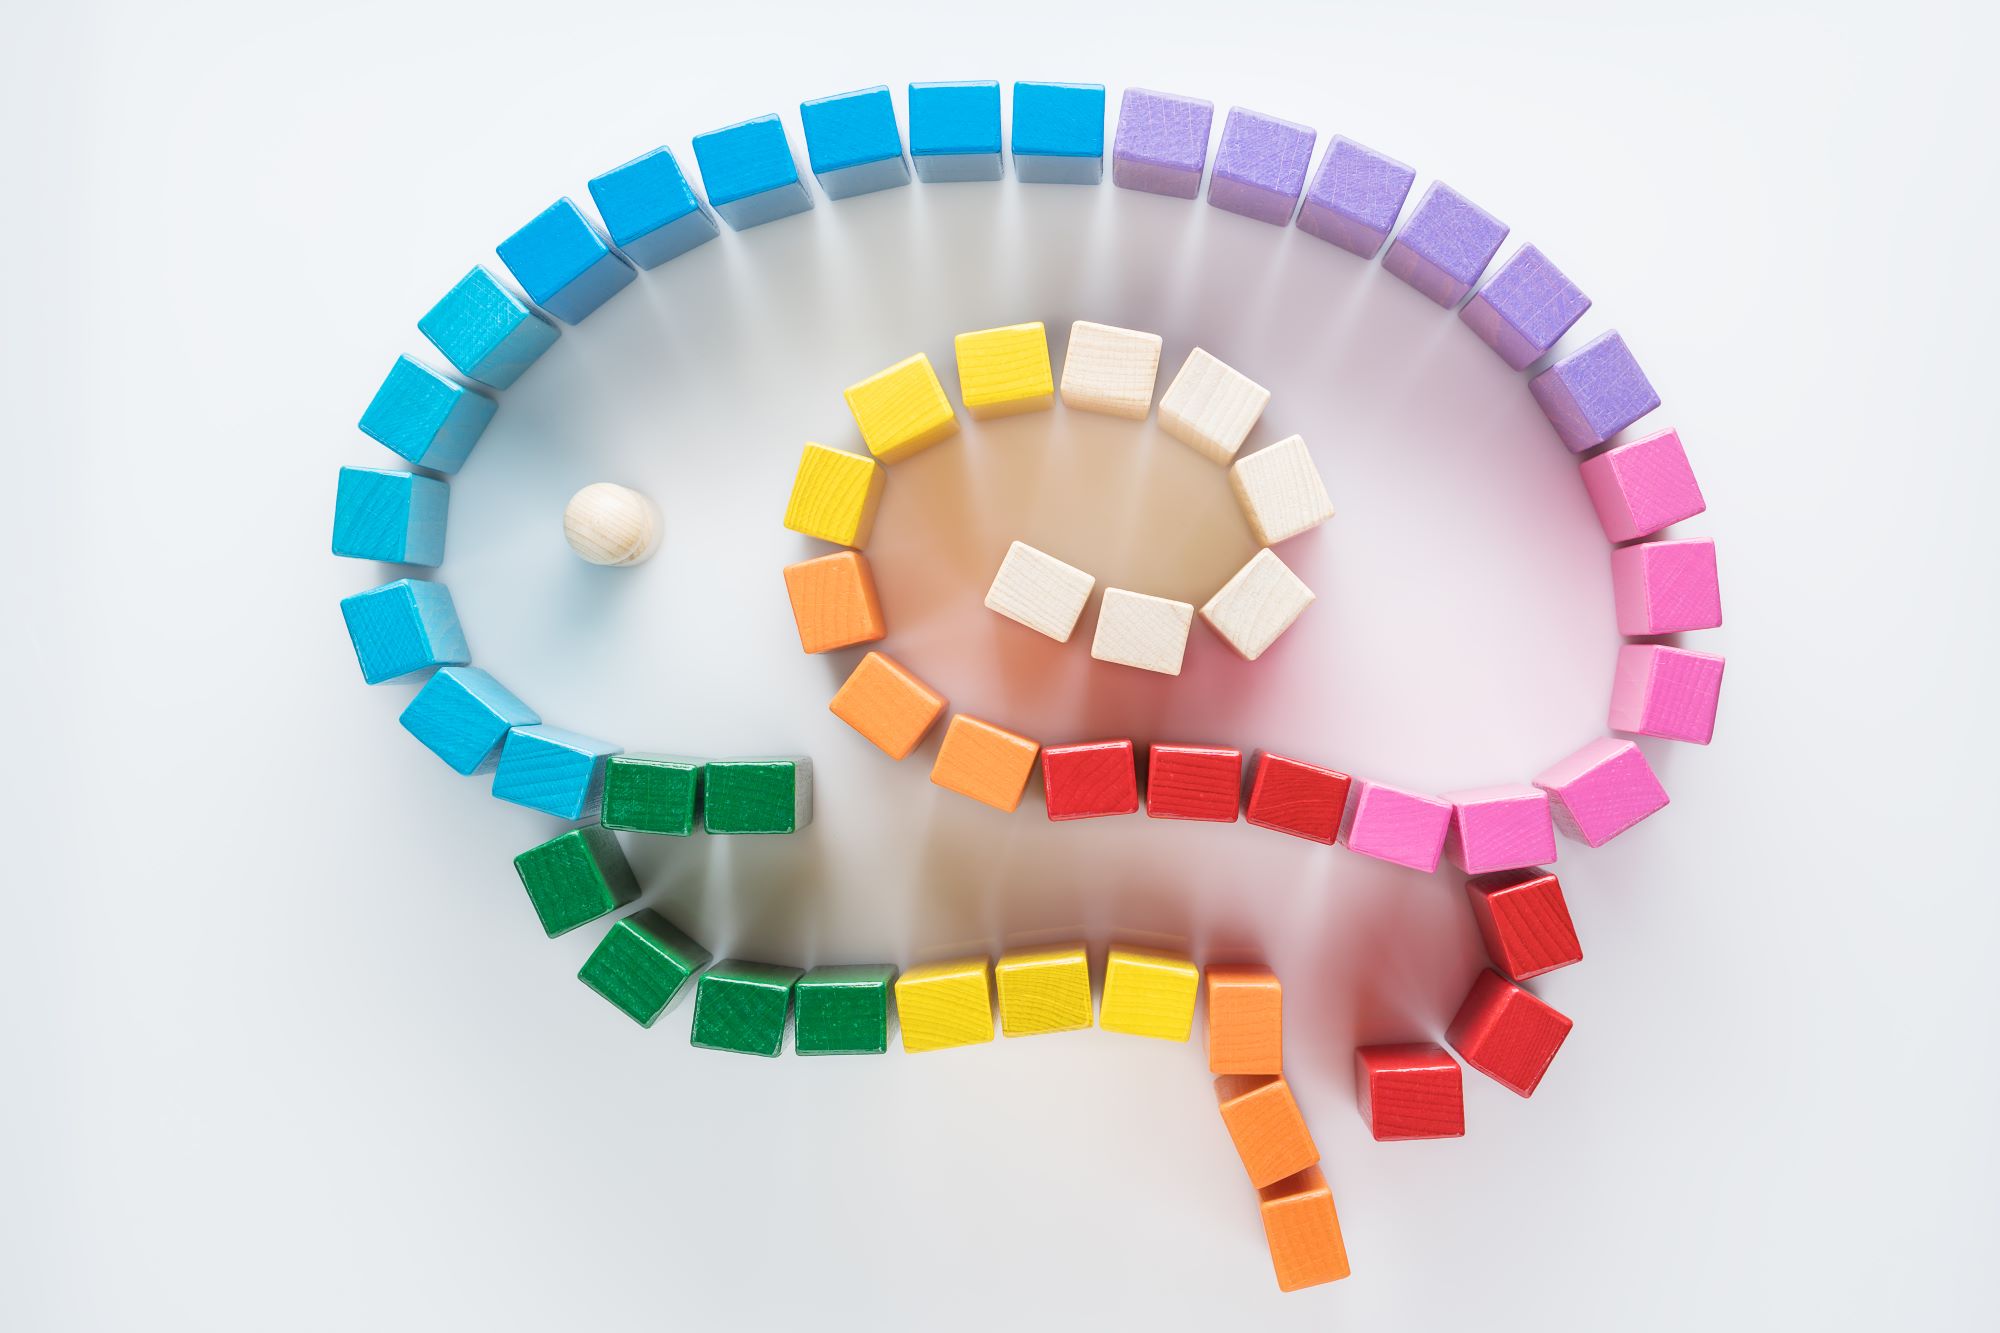 brain games concept, brain made out of colorful blocks on a white background